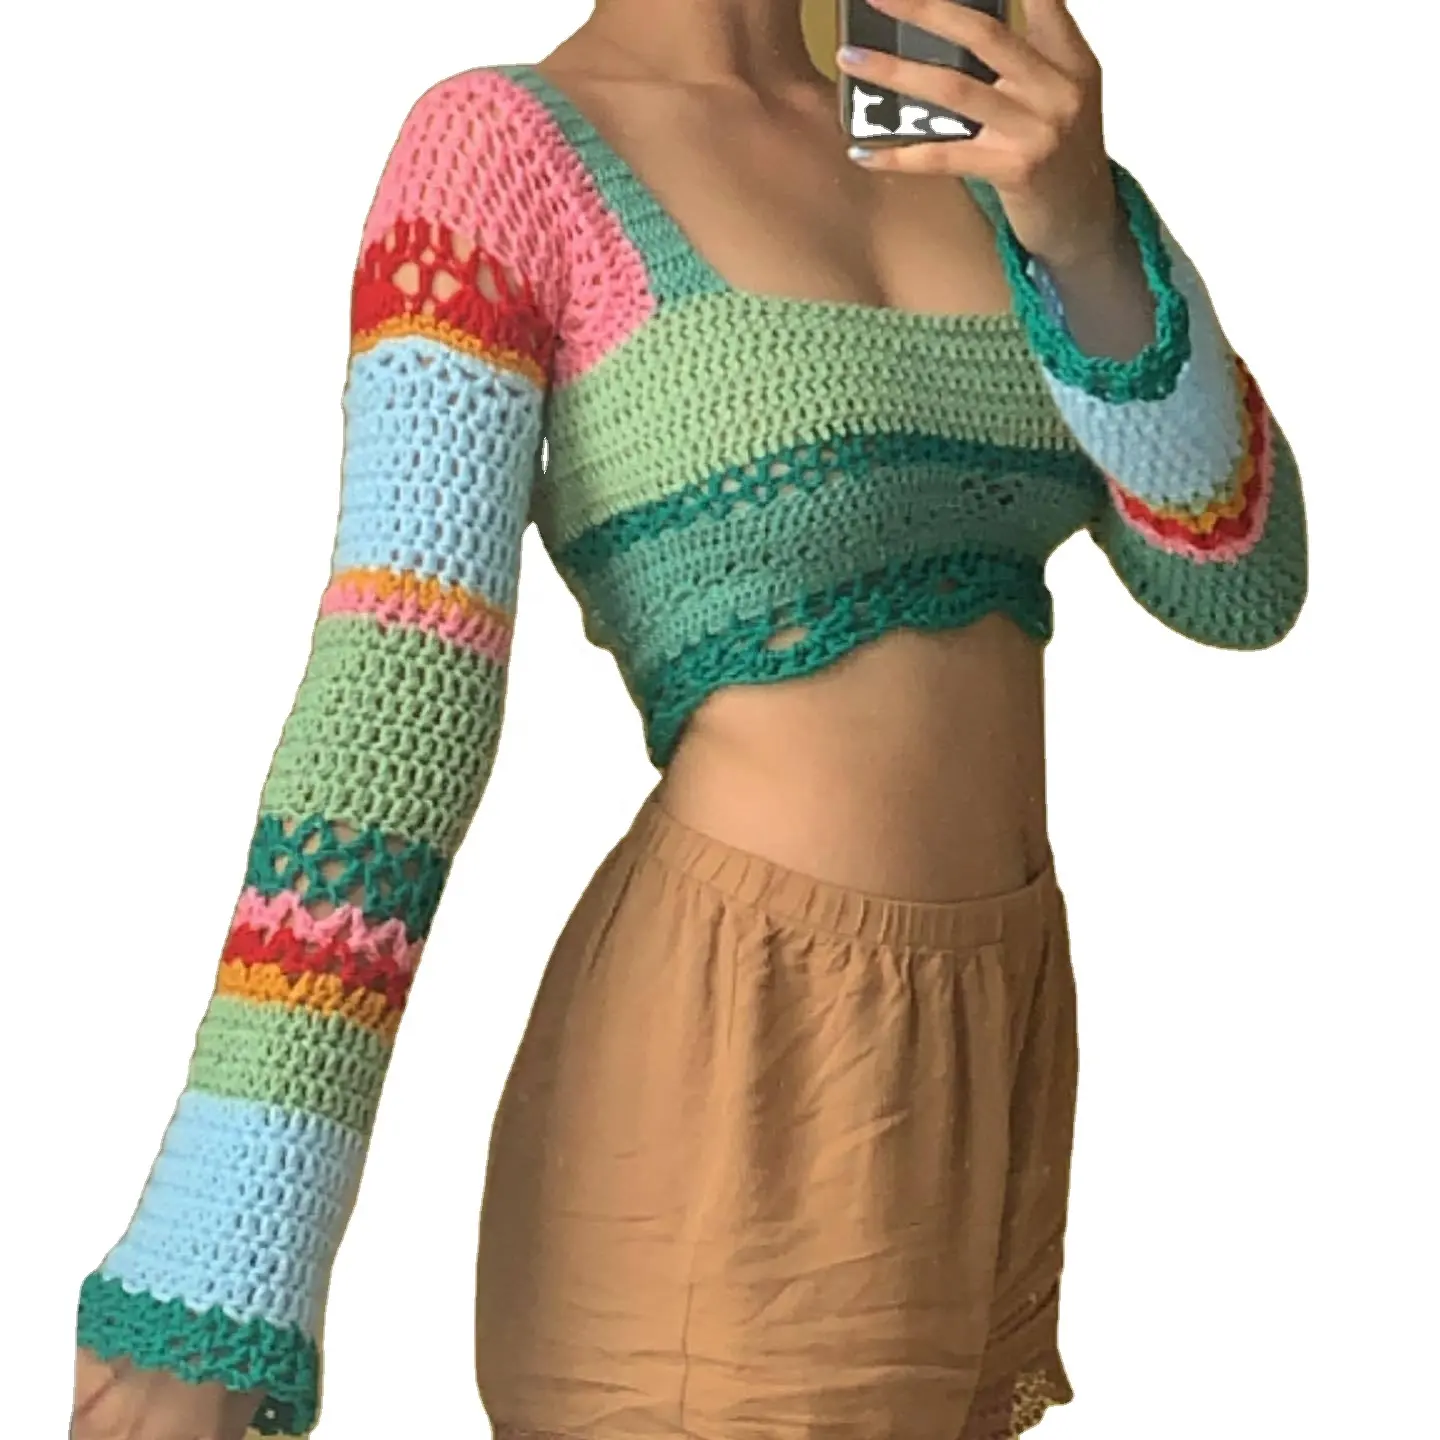 Crochet tops for women 2022 Jumper Women sexy Sweater Breathable Soft Fashion Girl Clothing Casual Quantity crochet tank tops